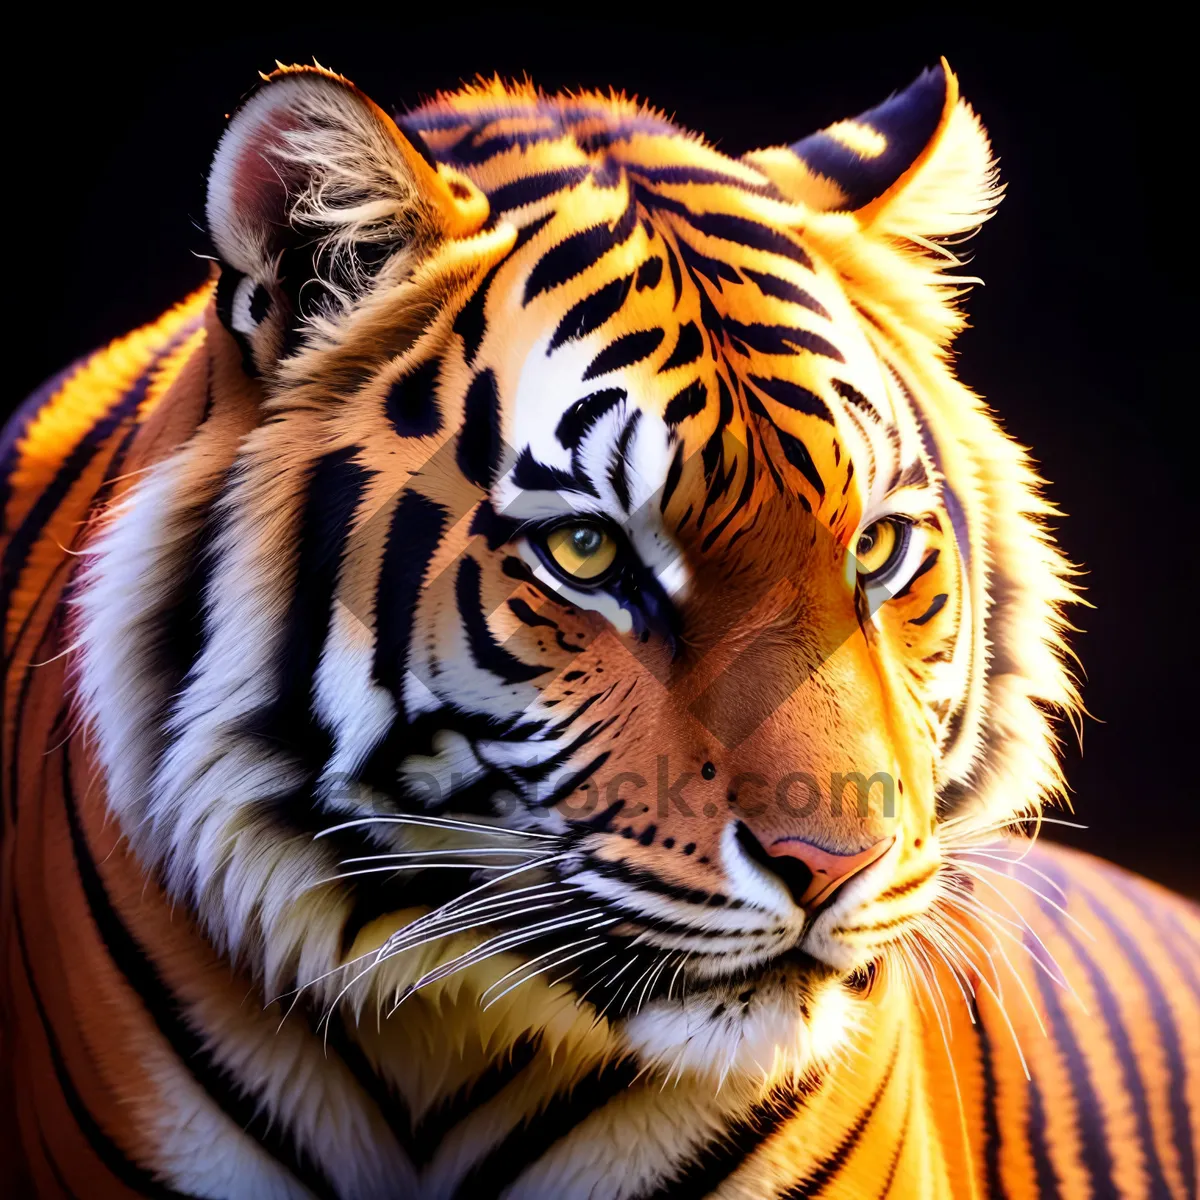 Picture of Powerful and Striped: The Majestic Tiger